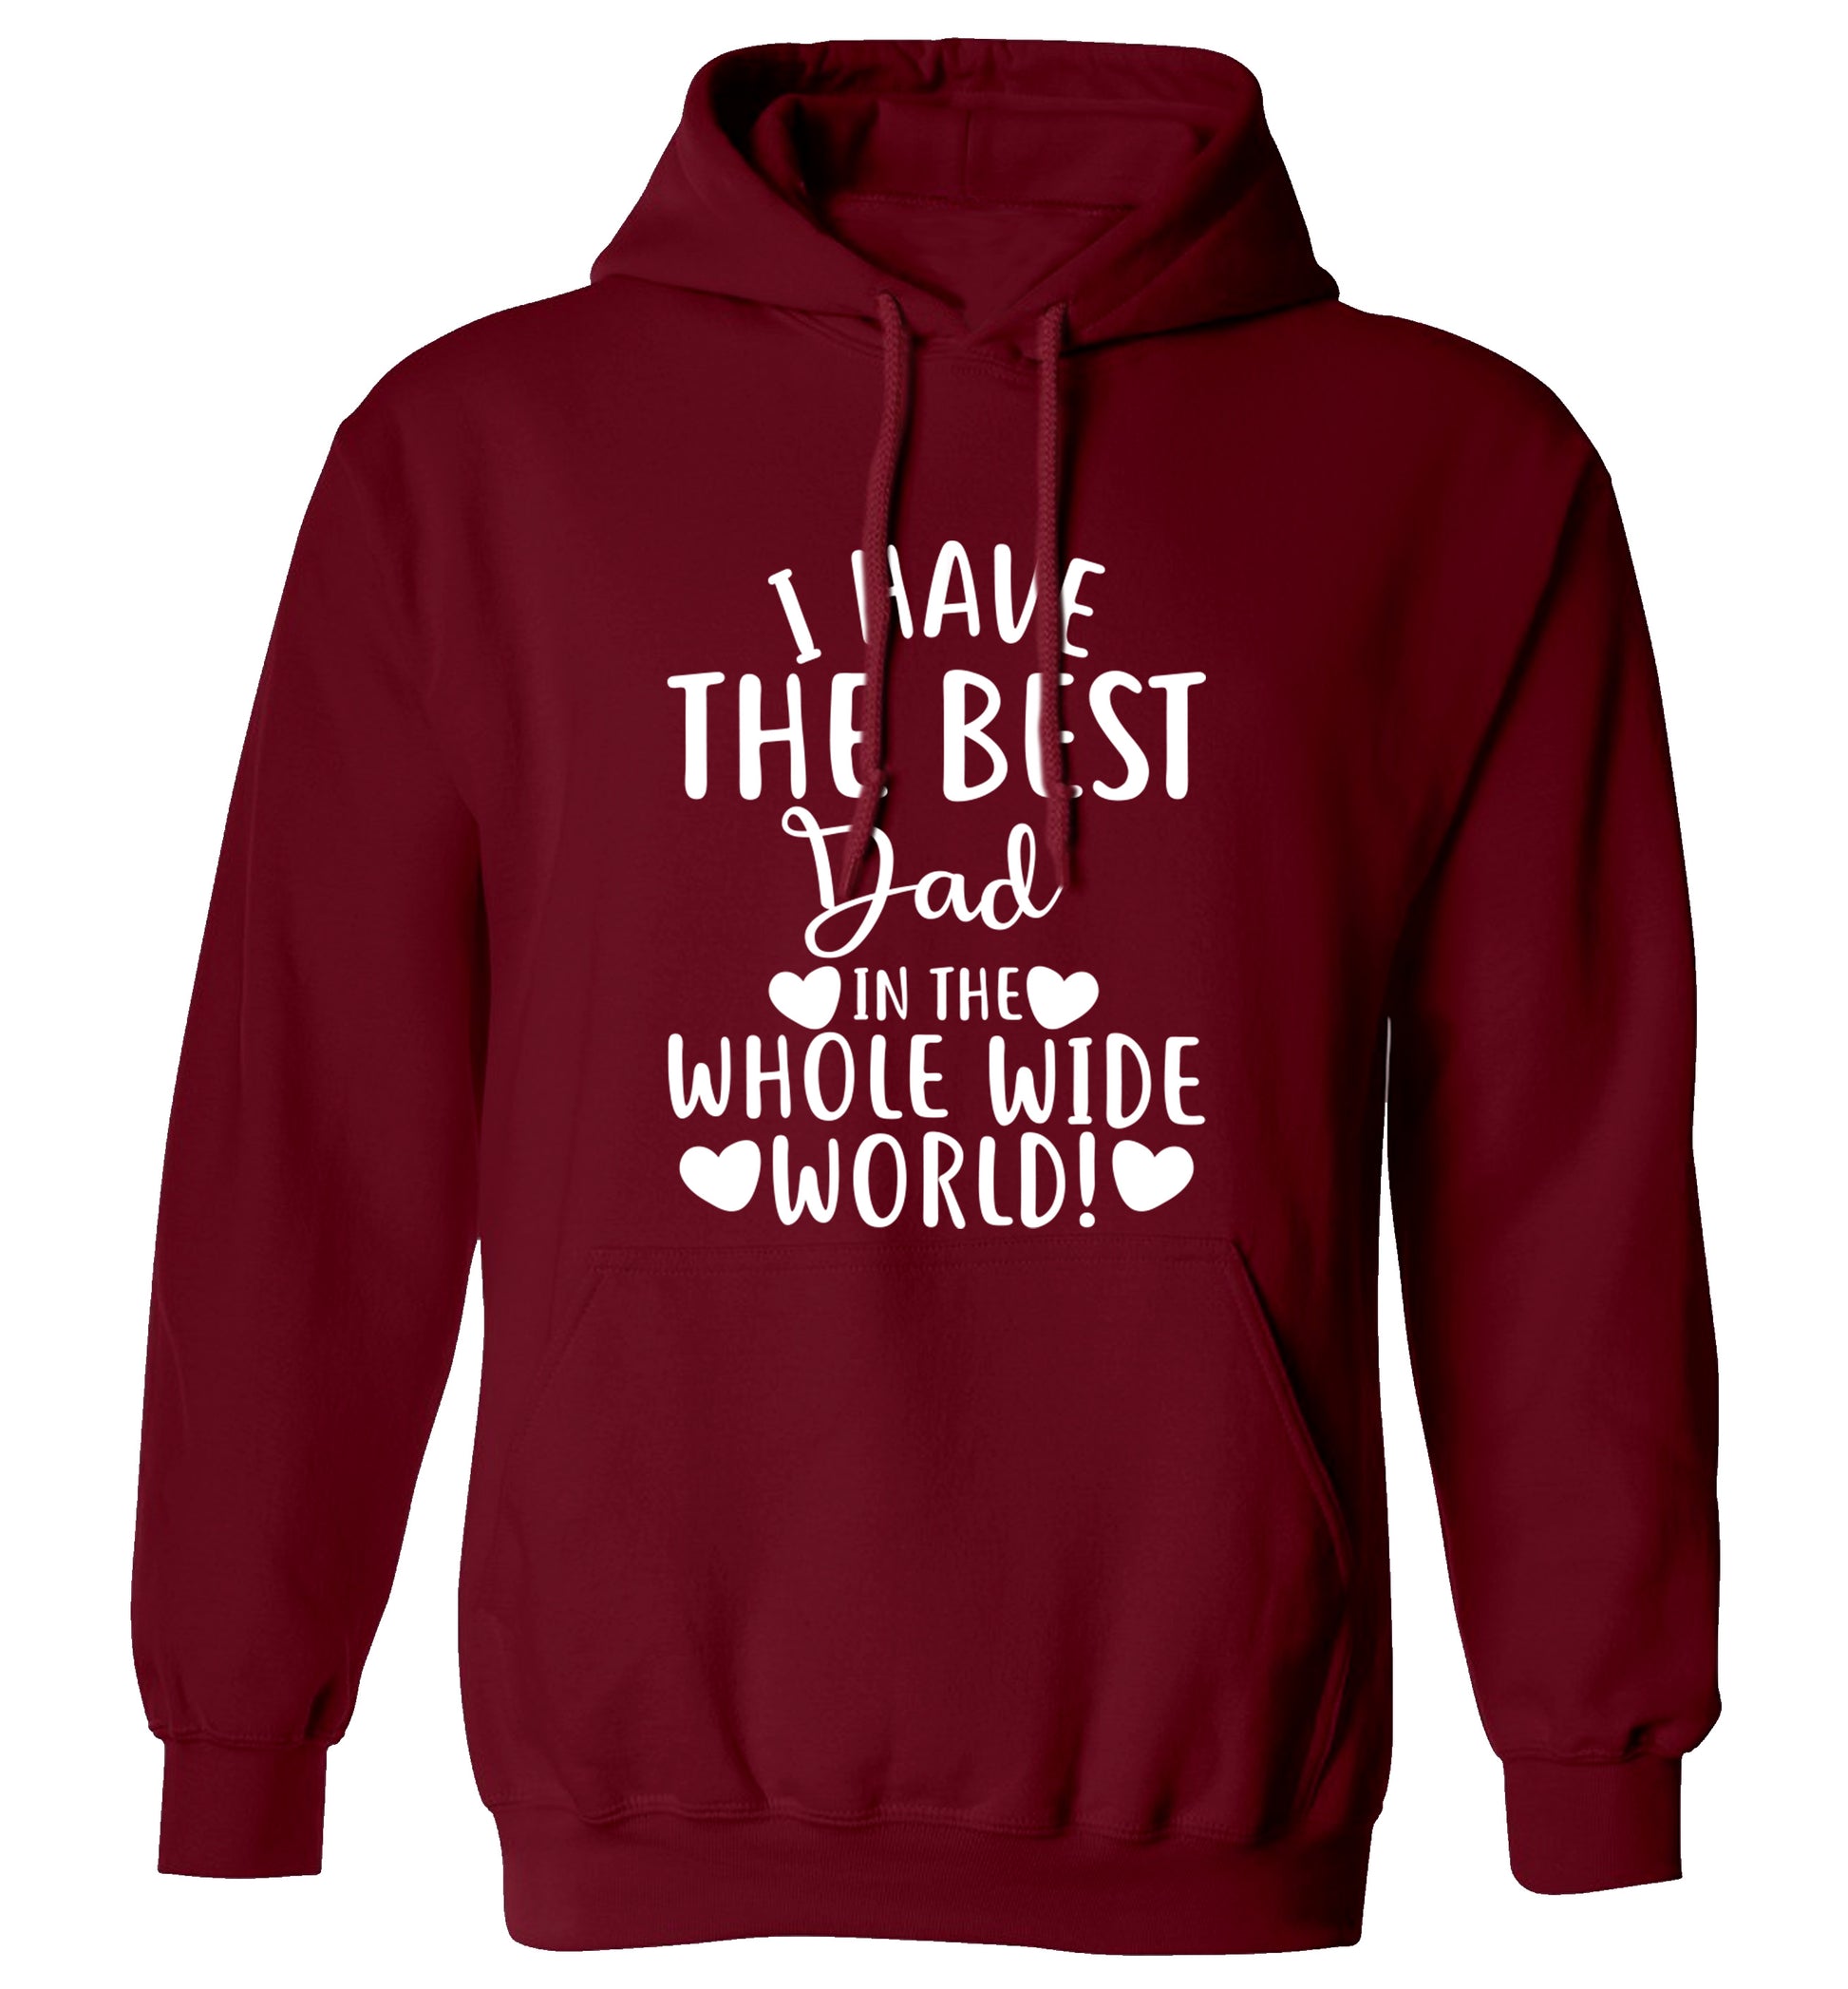 I have the best dad in the whole wide world! adults unisex maroon hoodie 2XL